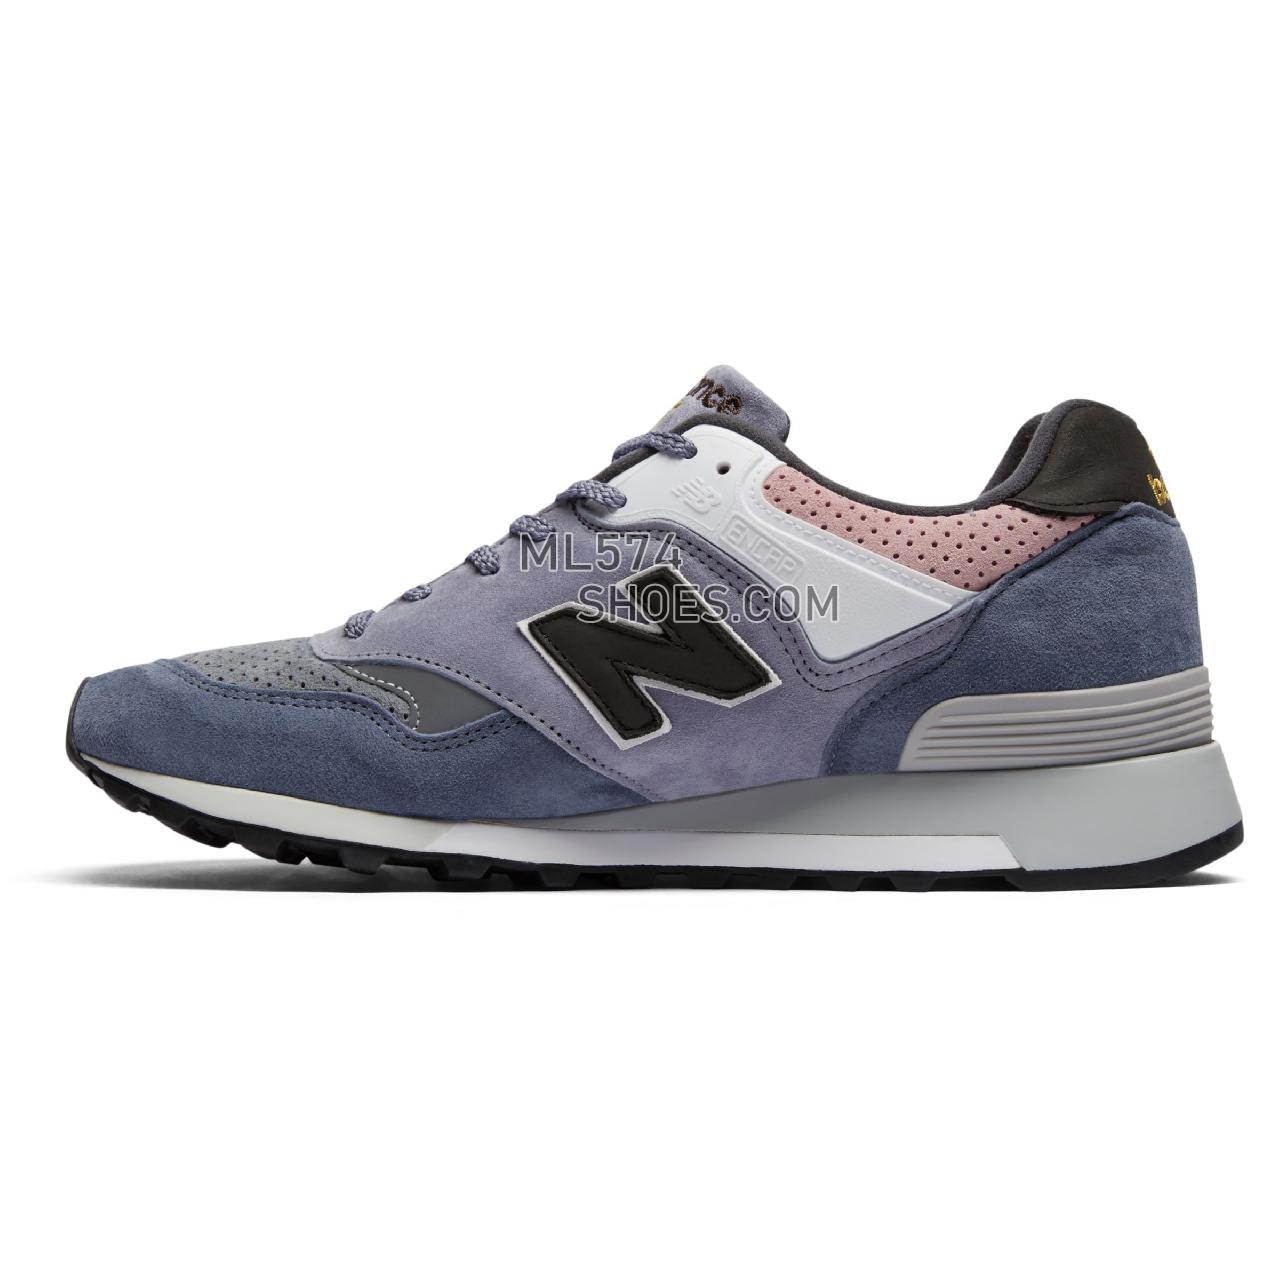 New Balance Made in UK 577 - Men's Made in USA And UK Sneakers - Blue with White and Pink - M577YOR